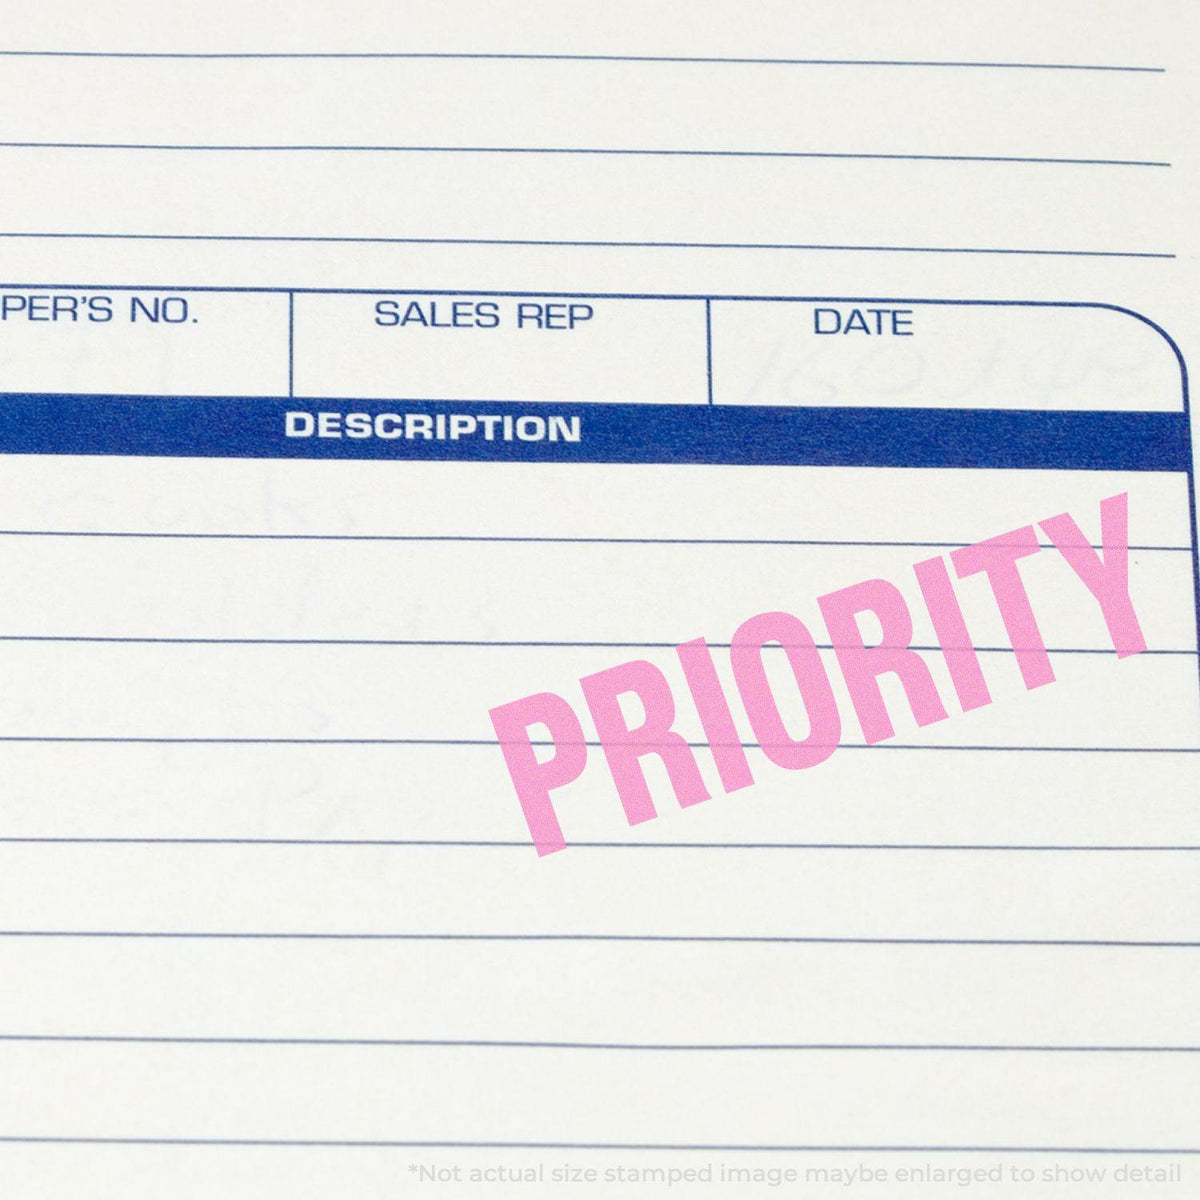 Bold Priority Rubber Stamp In Use Photo